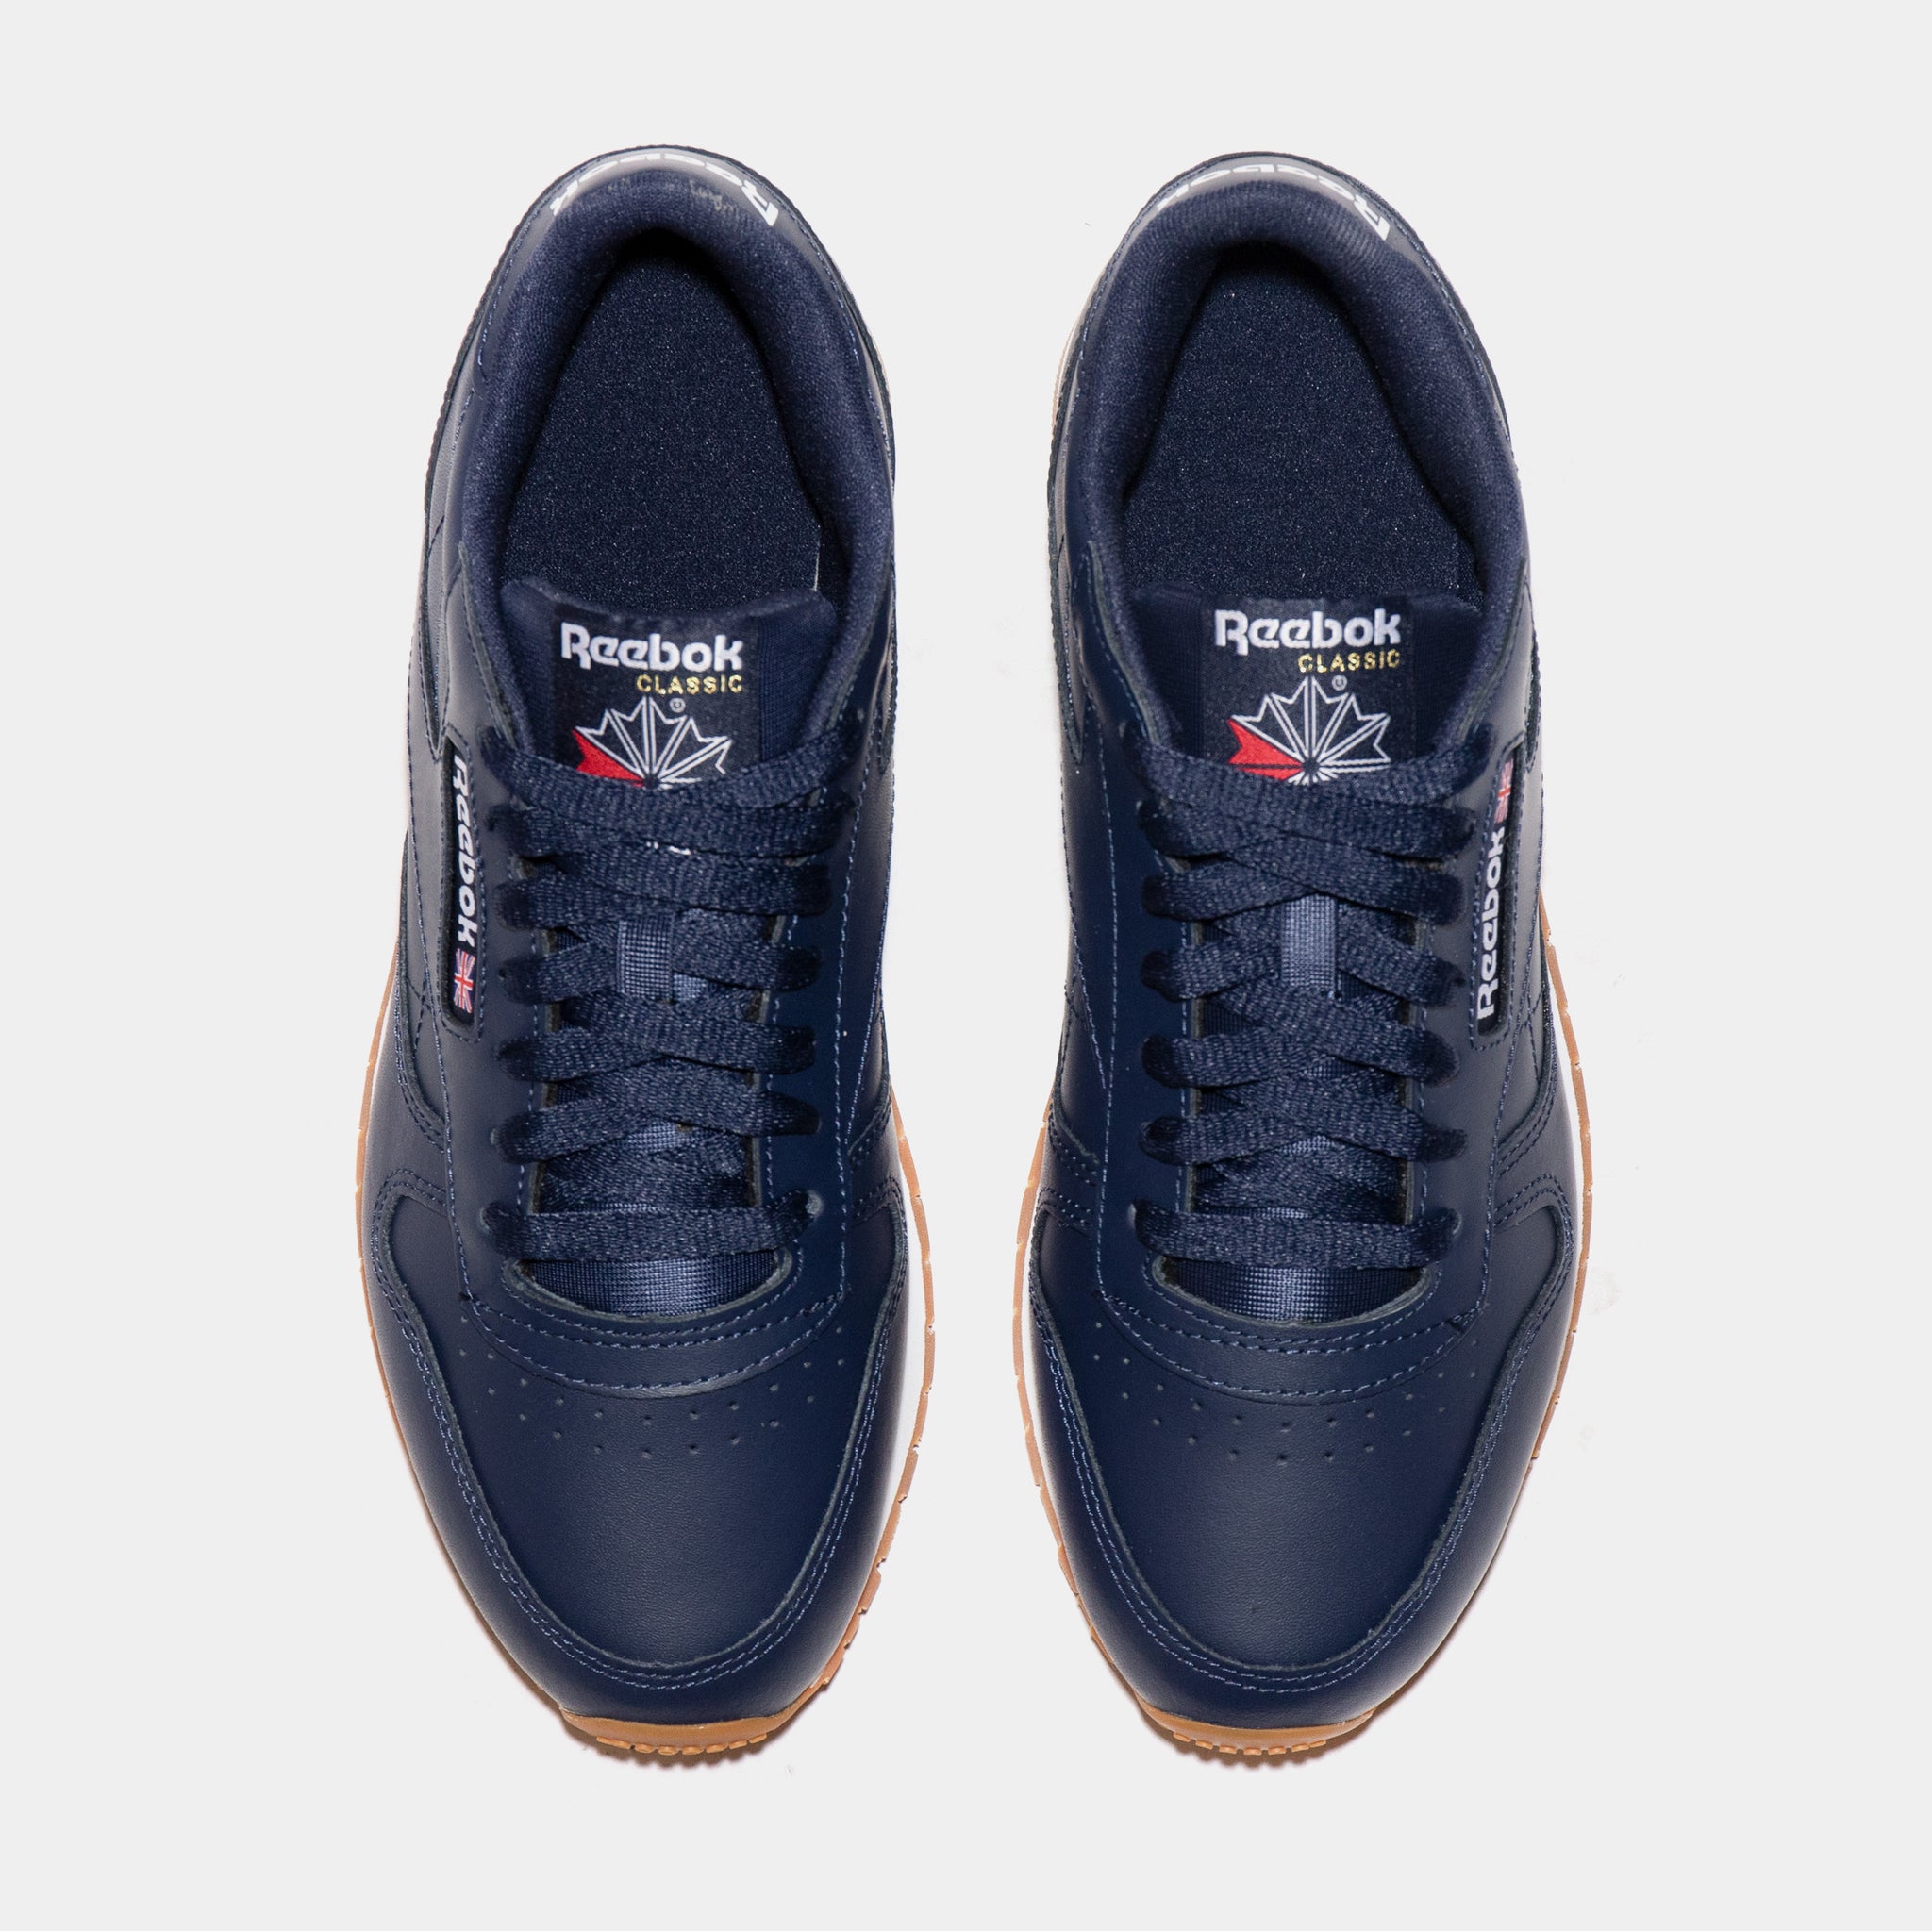 Lírico bisonte locutor Reebok Classic Leather Mens Lifestyle Shoes Navy Blue GY3600 – Shoe Palace